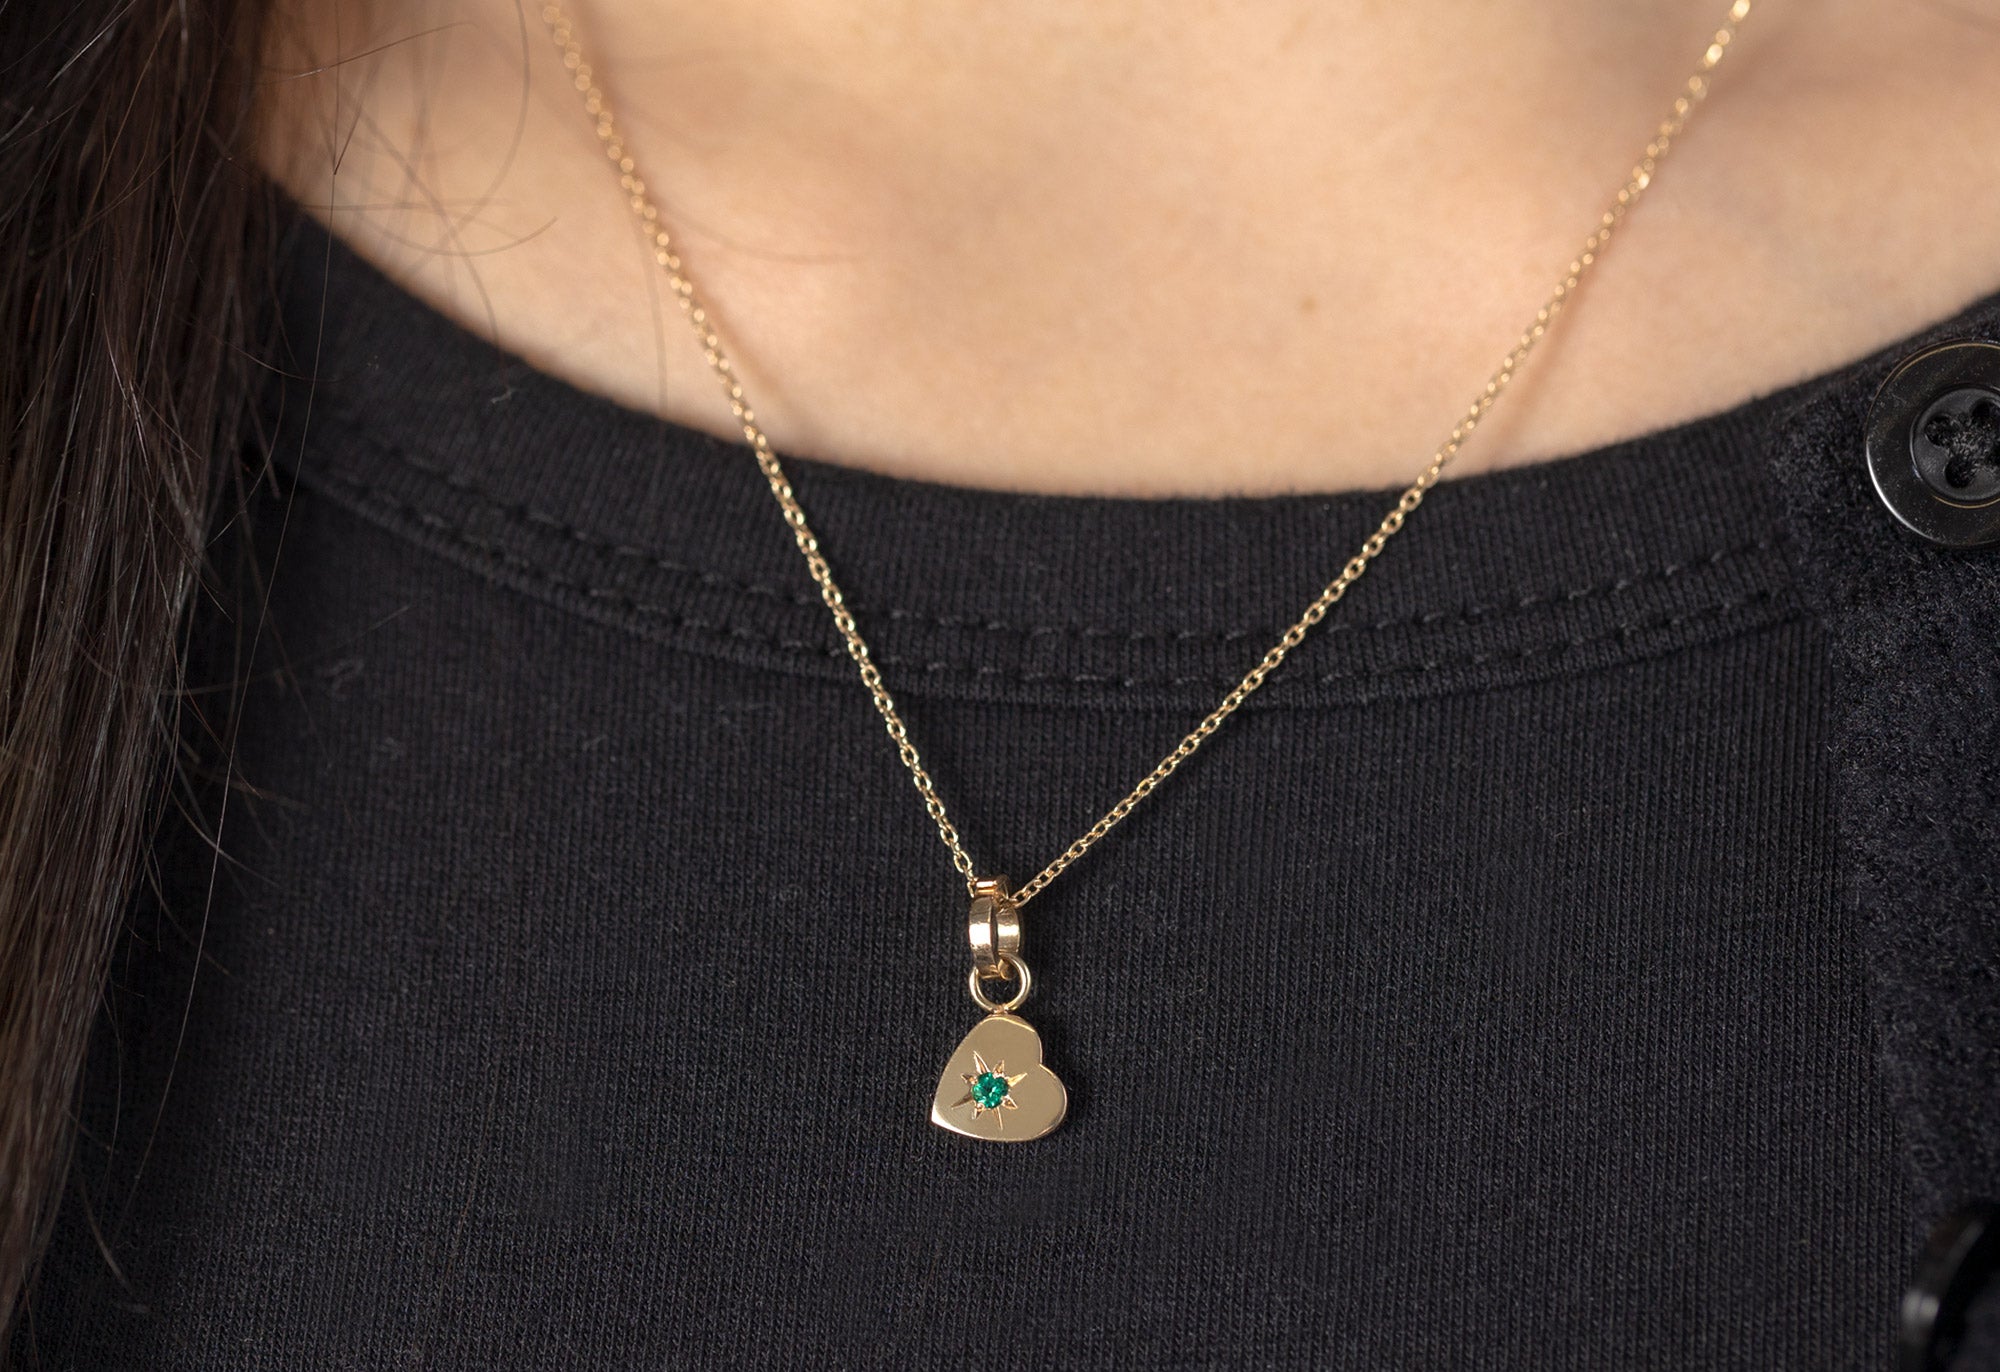 10k Yellow Gold Emerald Heart Charm on Necklace Chain on Model